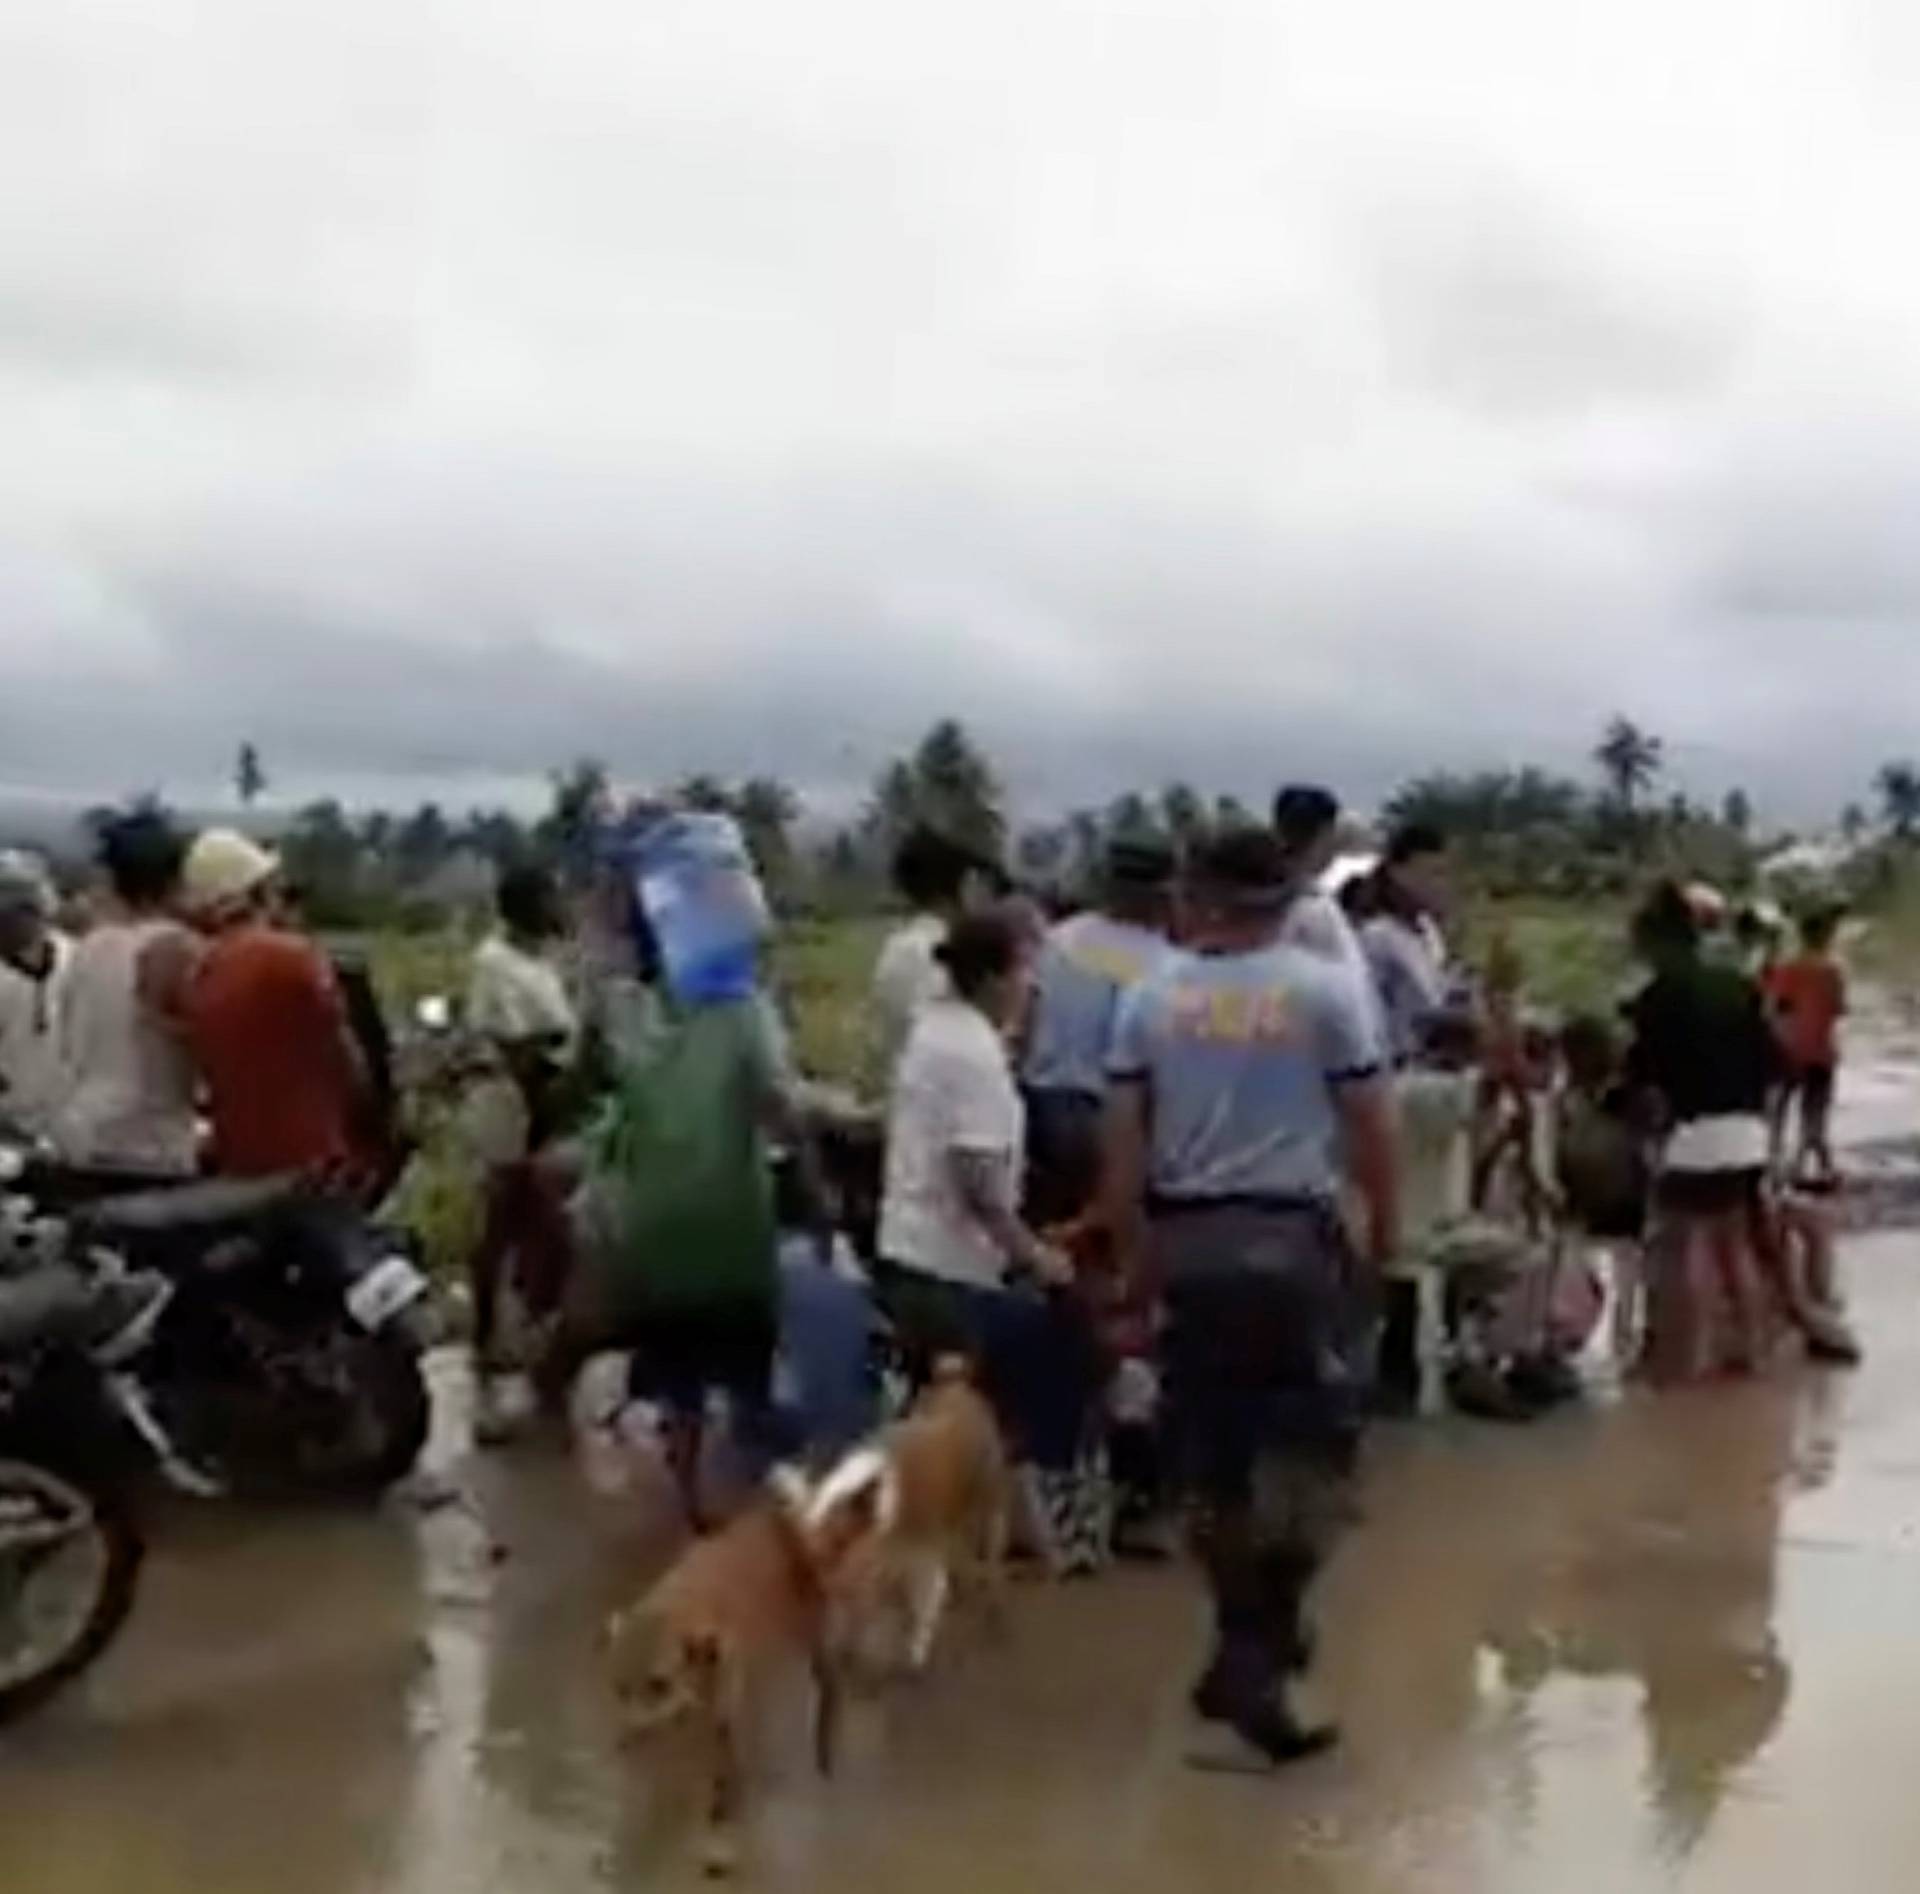 A general view shows search, retrieval, and relief operations ongoing at the flooded areas at Tzu Chi Village in Barangay Liloan